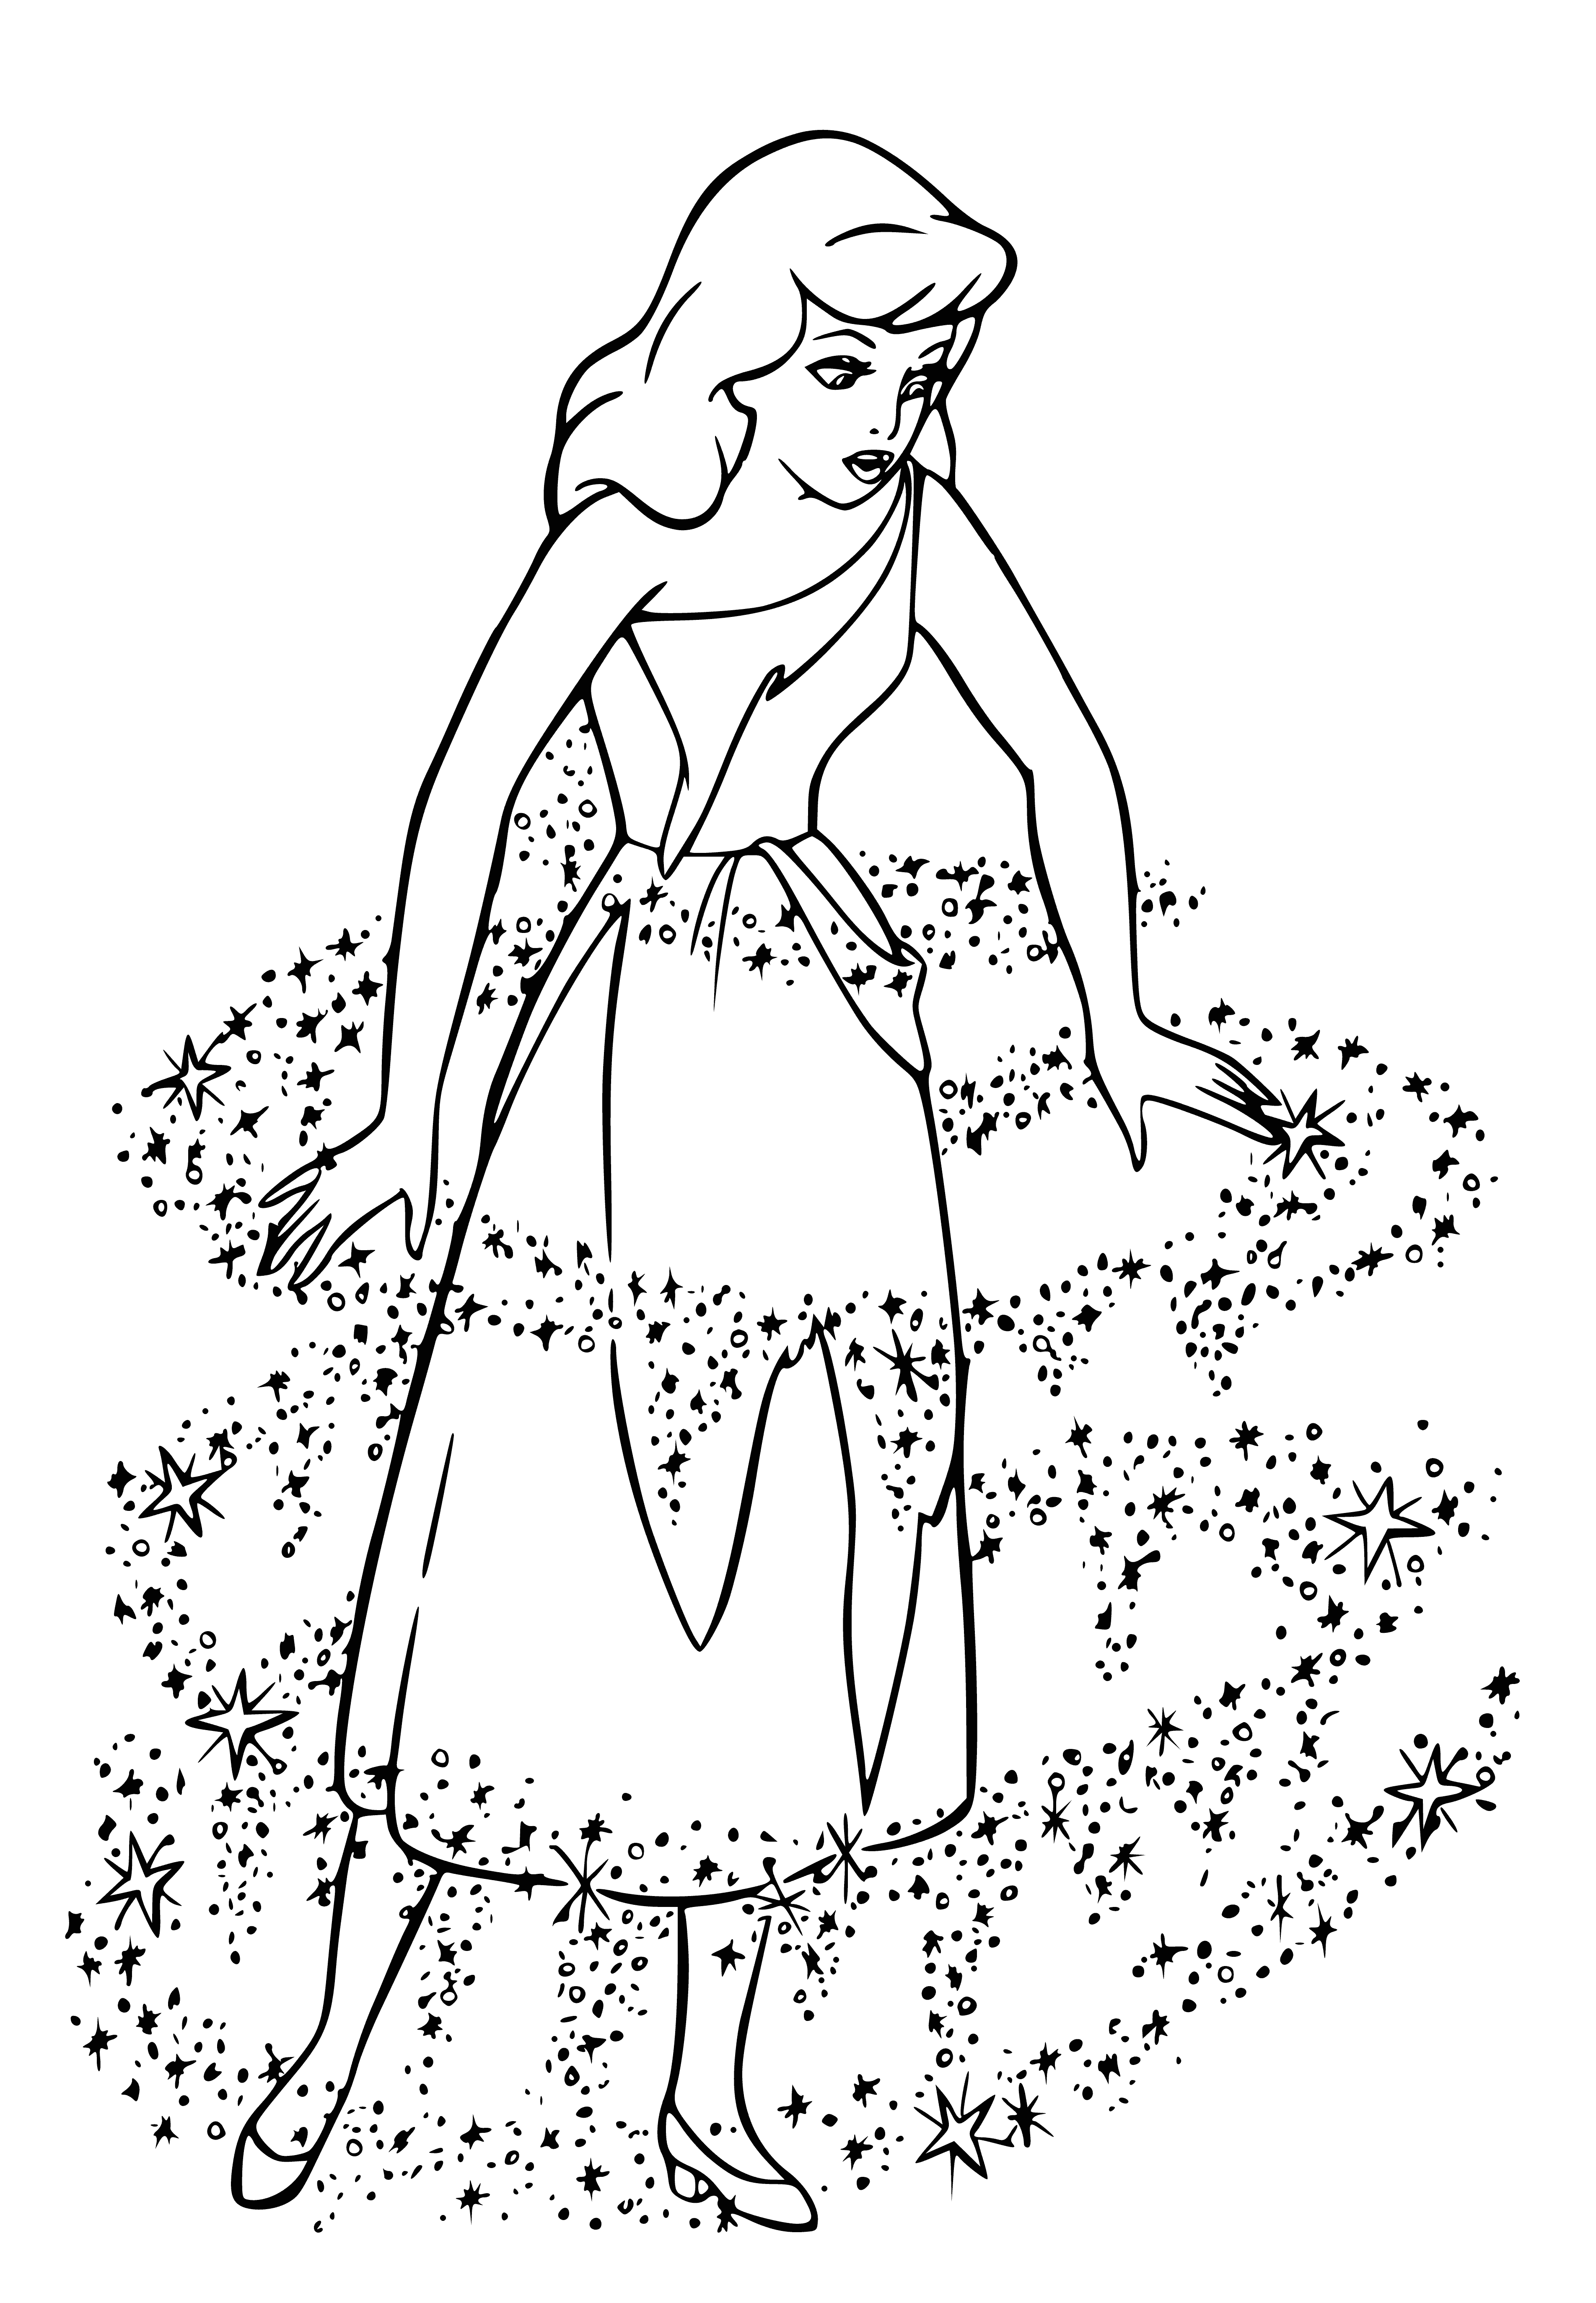 The beginning of the magic coloring page